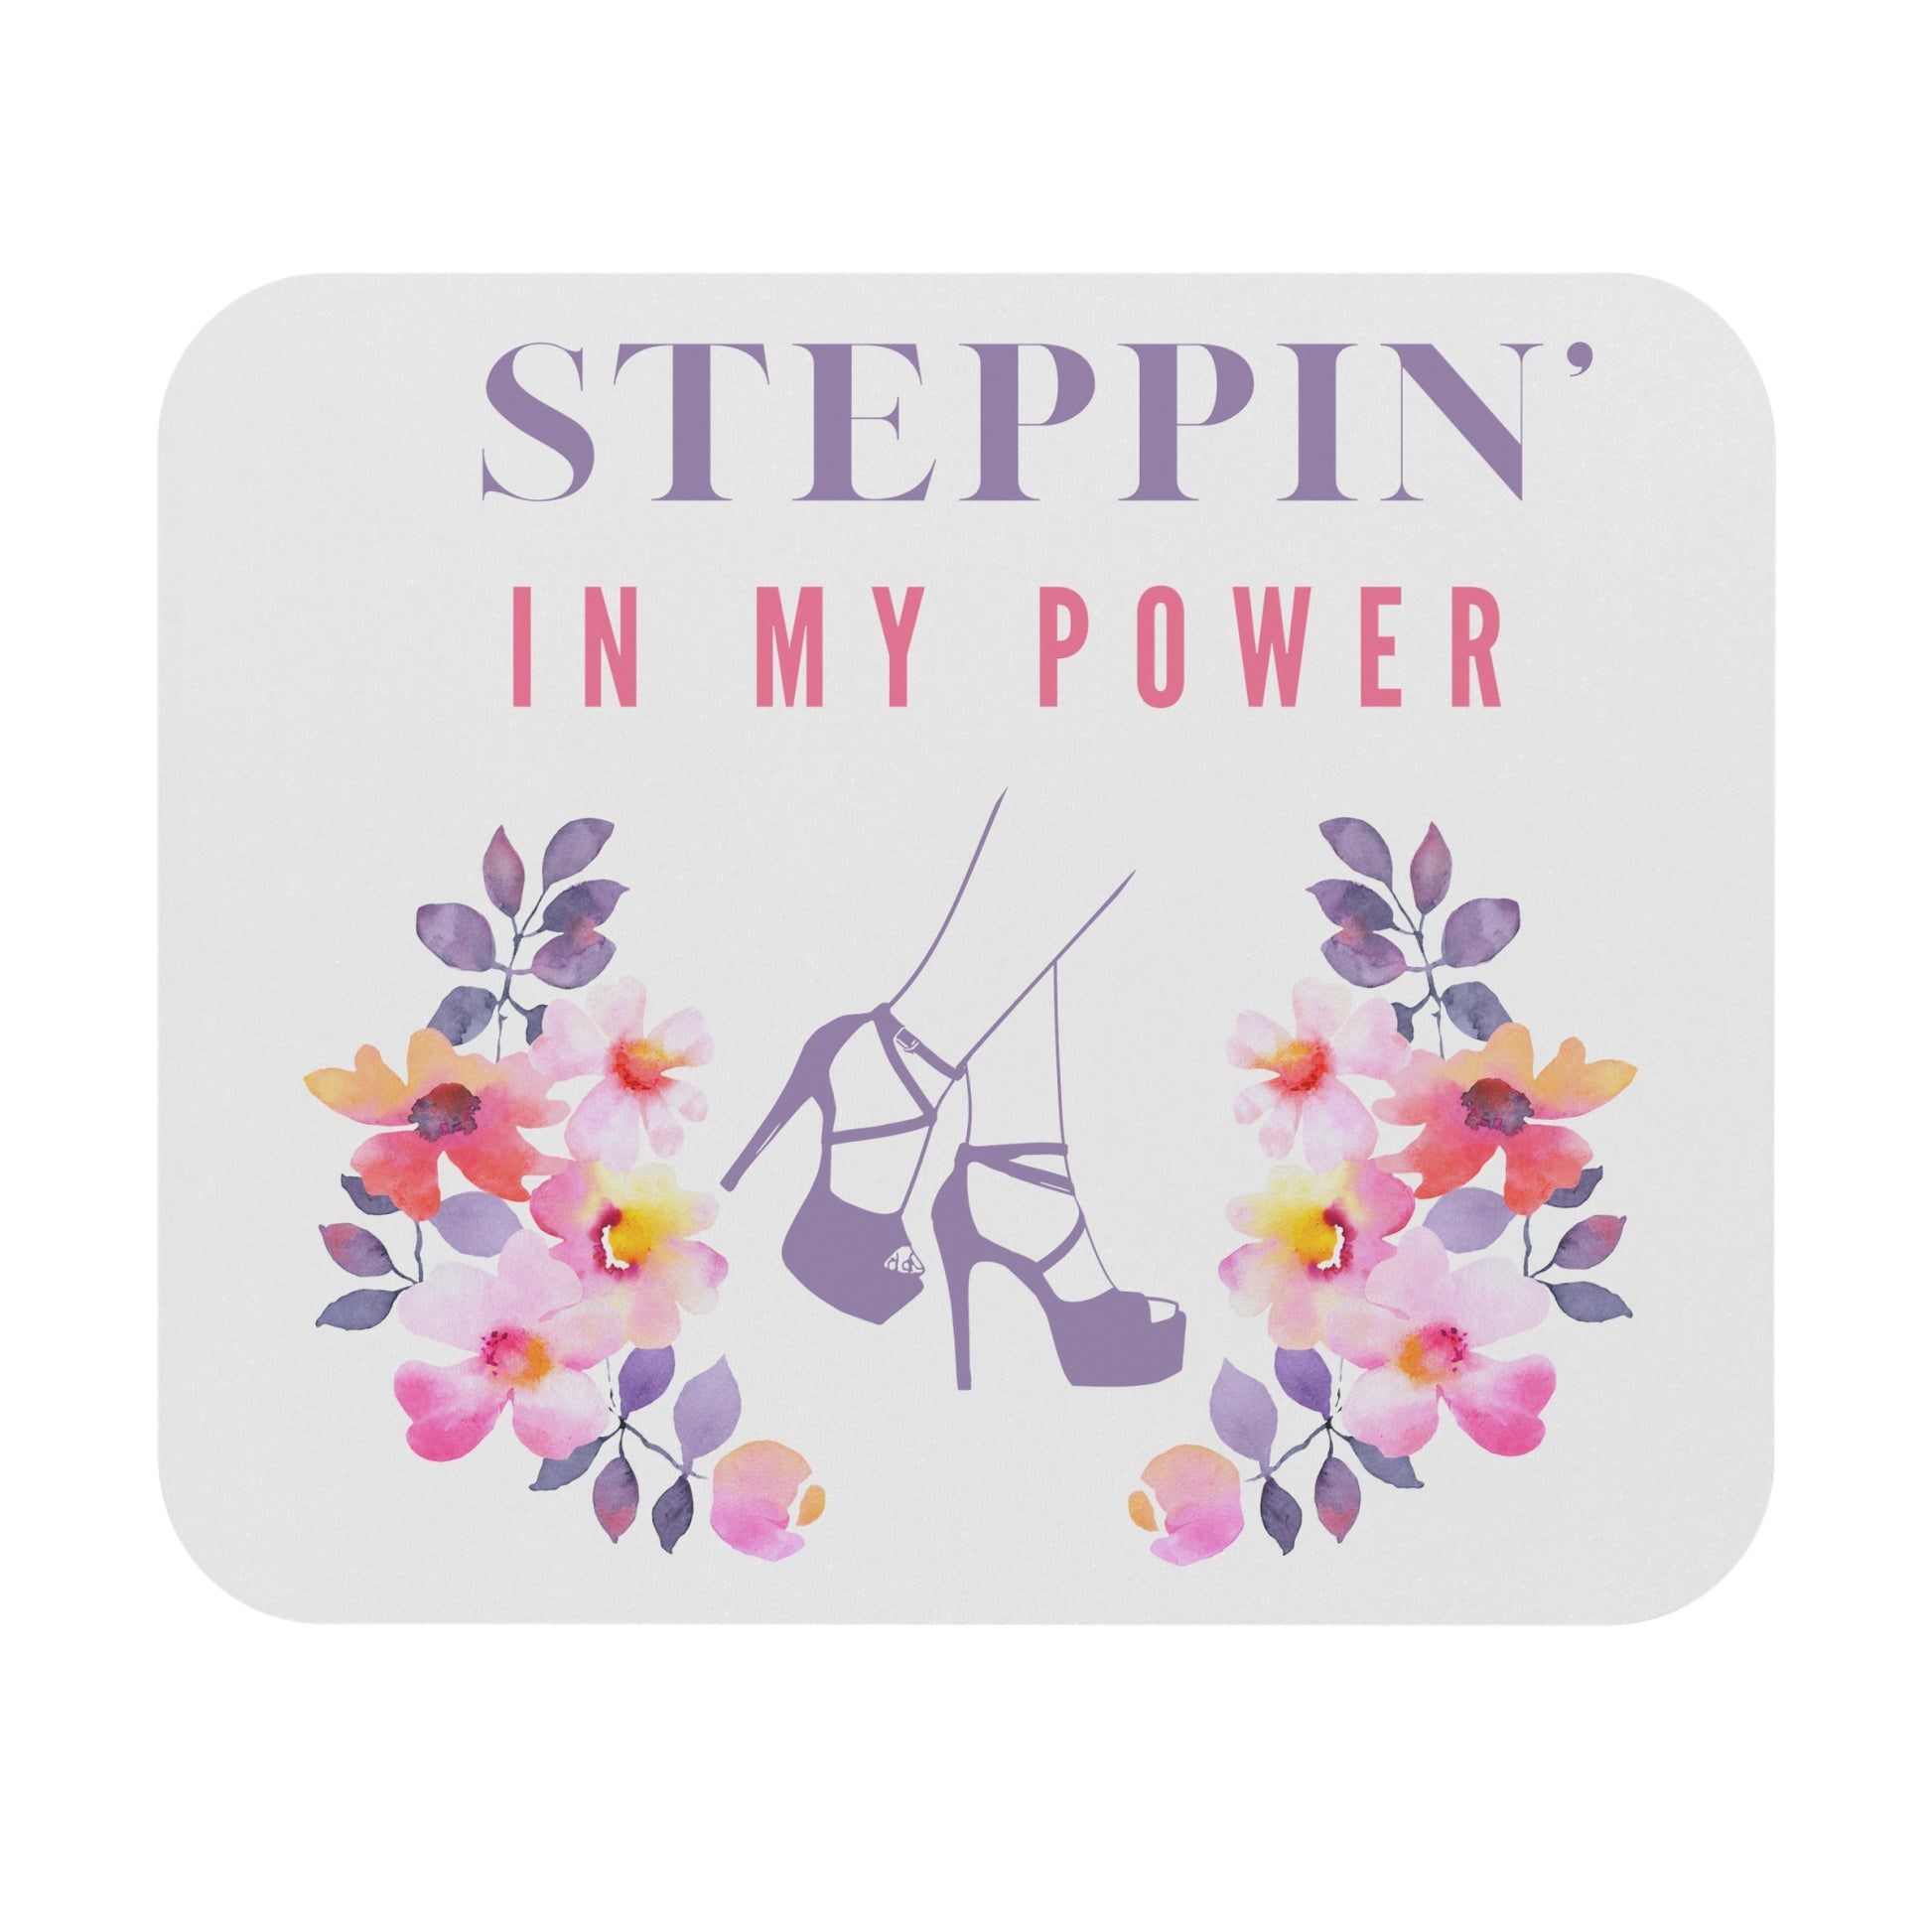 Empowerment Mouse Pad, Christian Mouse Pad, Faith Mouse Pad